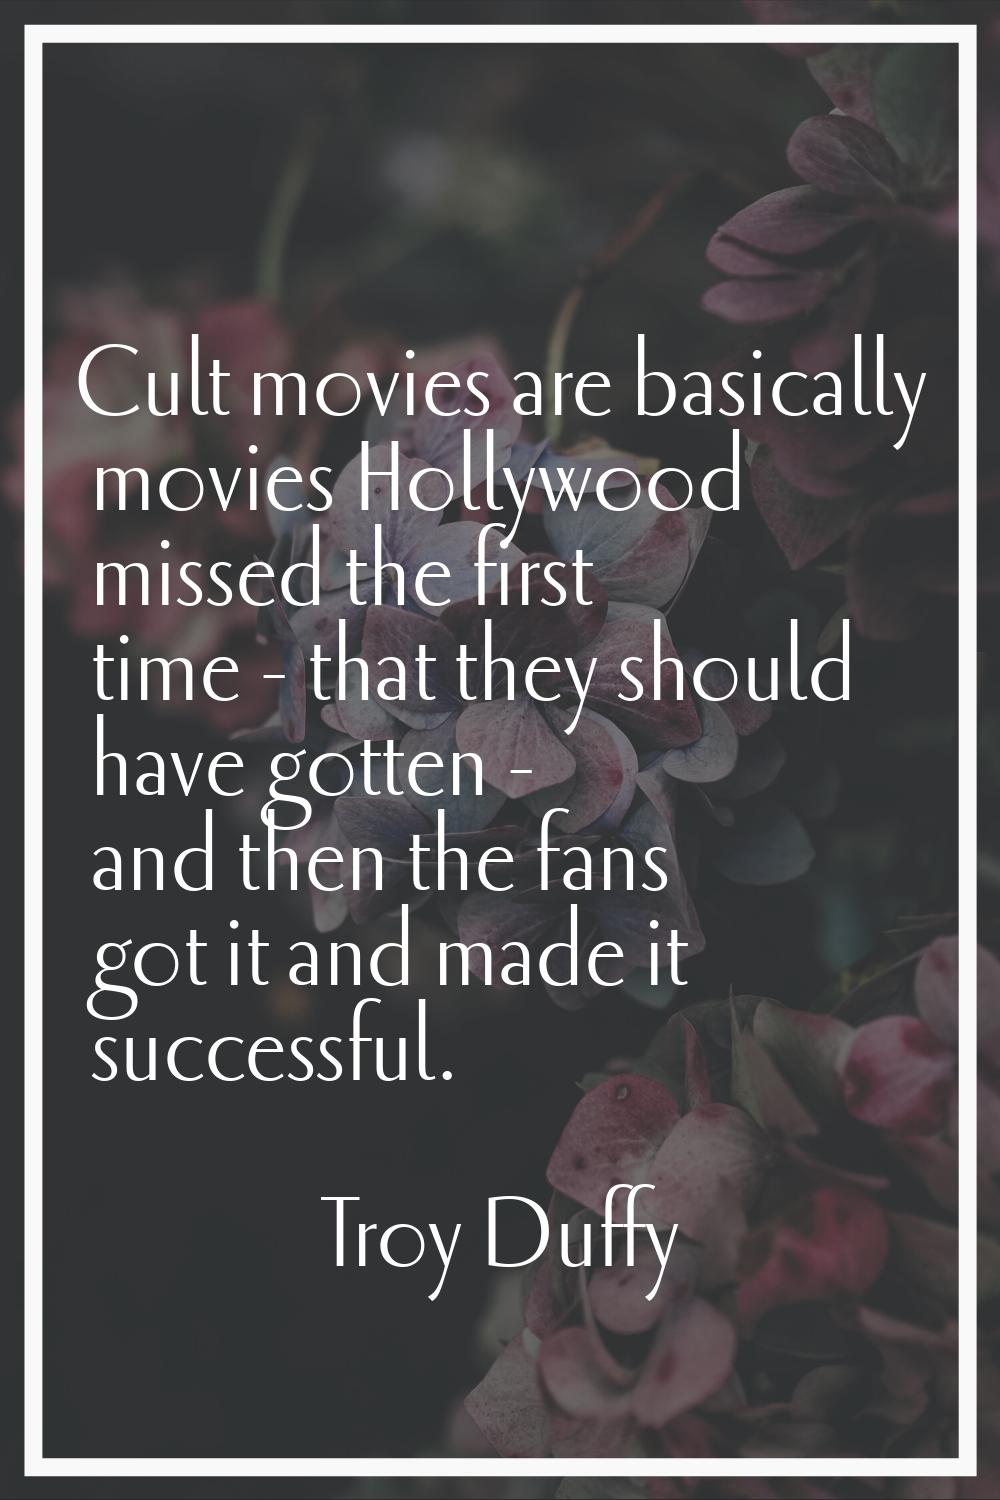 Cult movies are basically movies Hollywood missed the first time - that they should have gotten - a